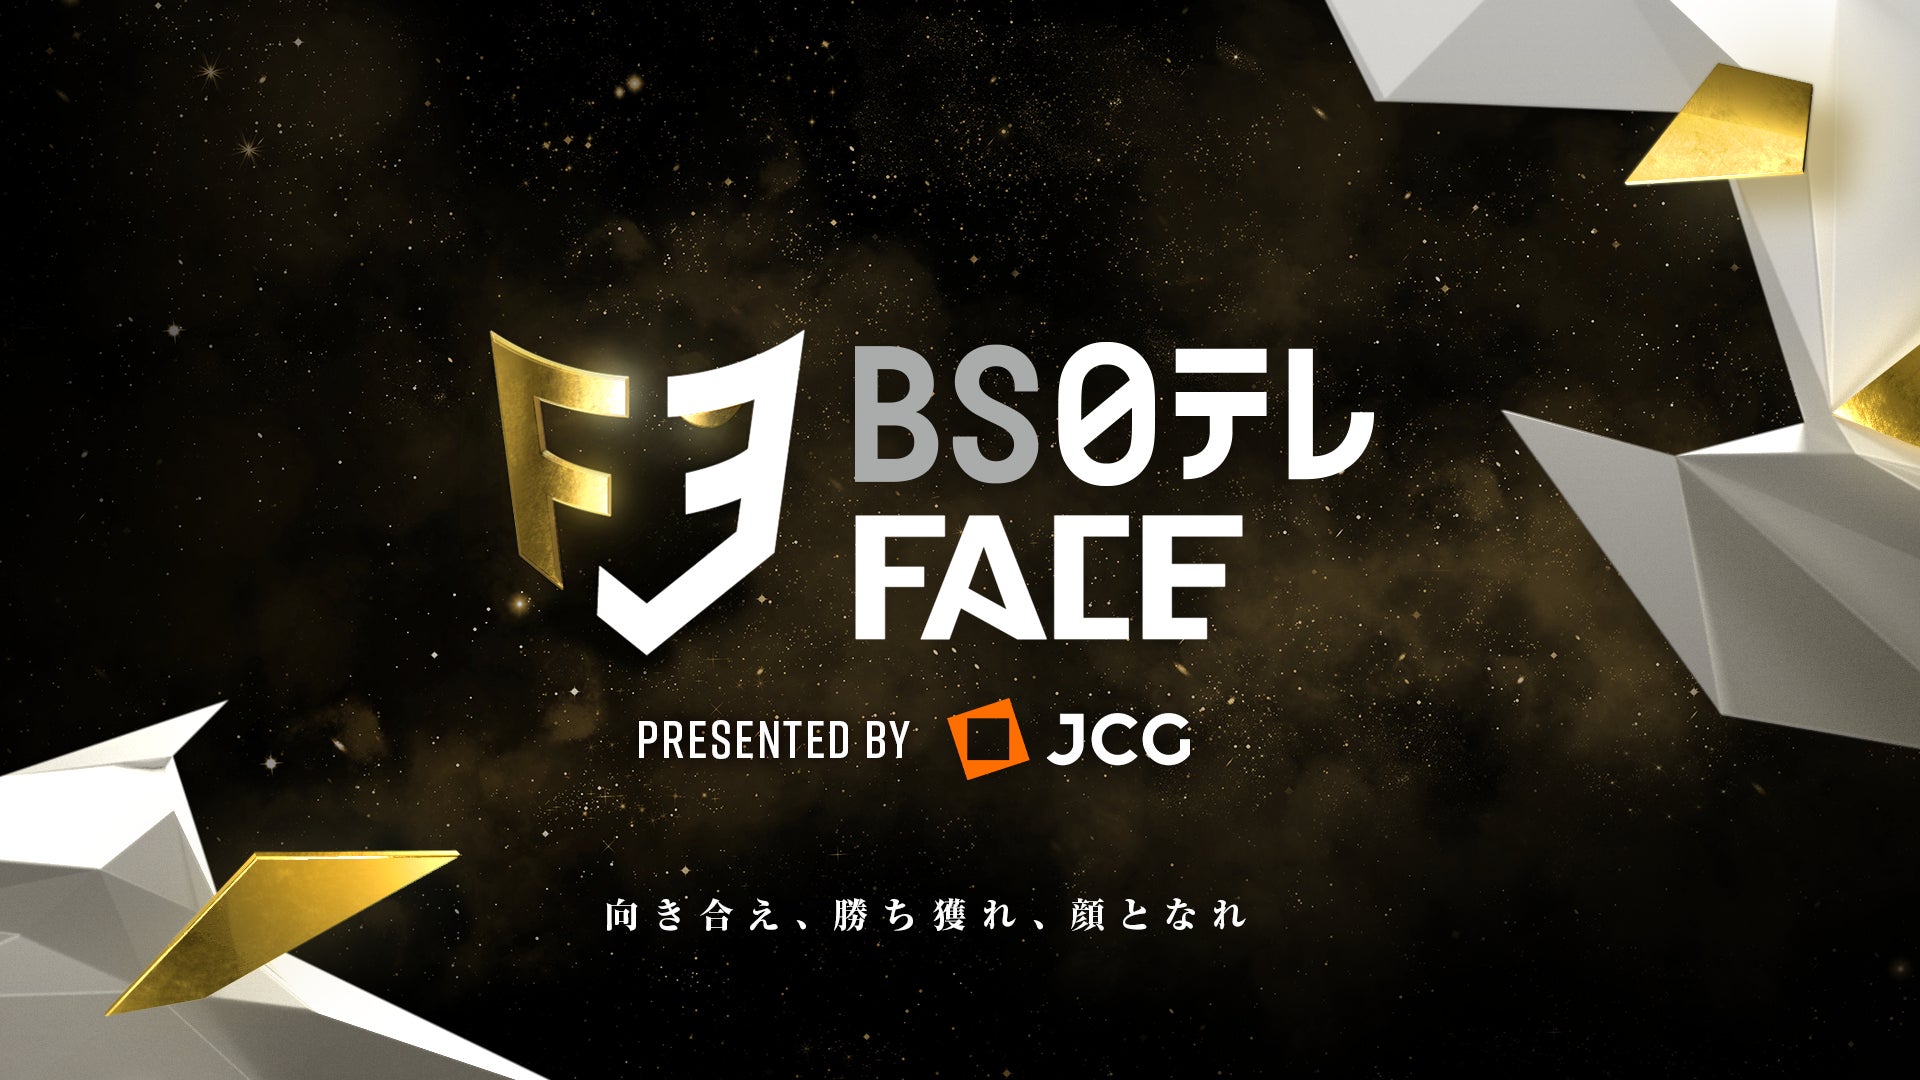 「ＢＳ日テレFACE Apex Legends presented by JCG」、『SwipeVideo』（スワイプビデオ）にてマルチアングル配信決定！